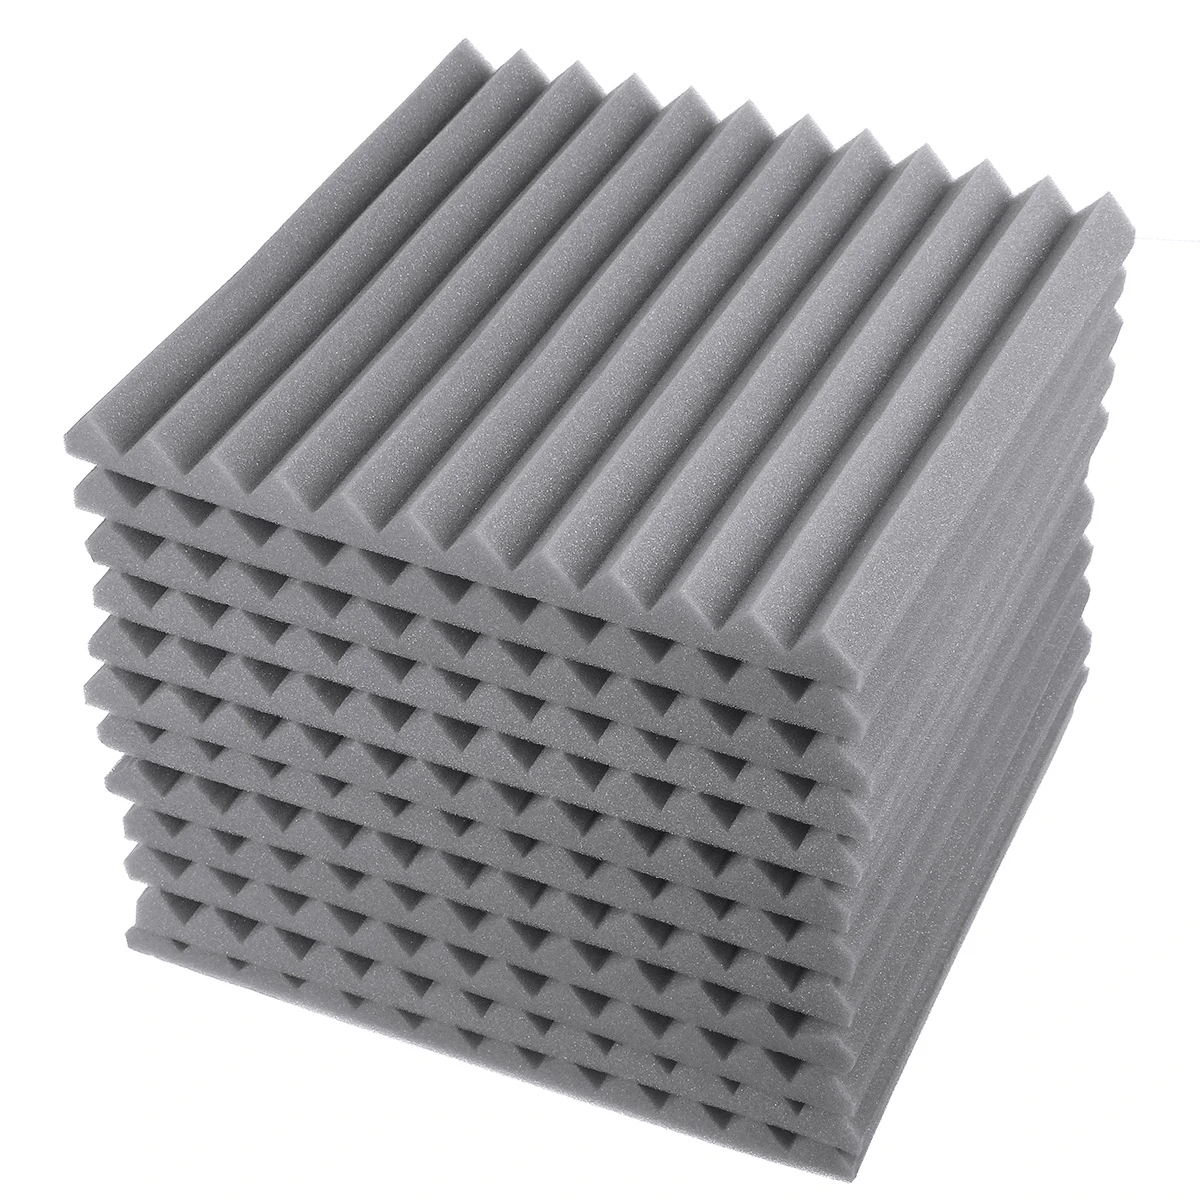 Find 24Pcs Acoustic Panels Tiles Studio Soundproofing Insulation Closed Cell Foam for Sale on Gipsybee.com